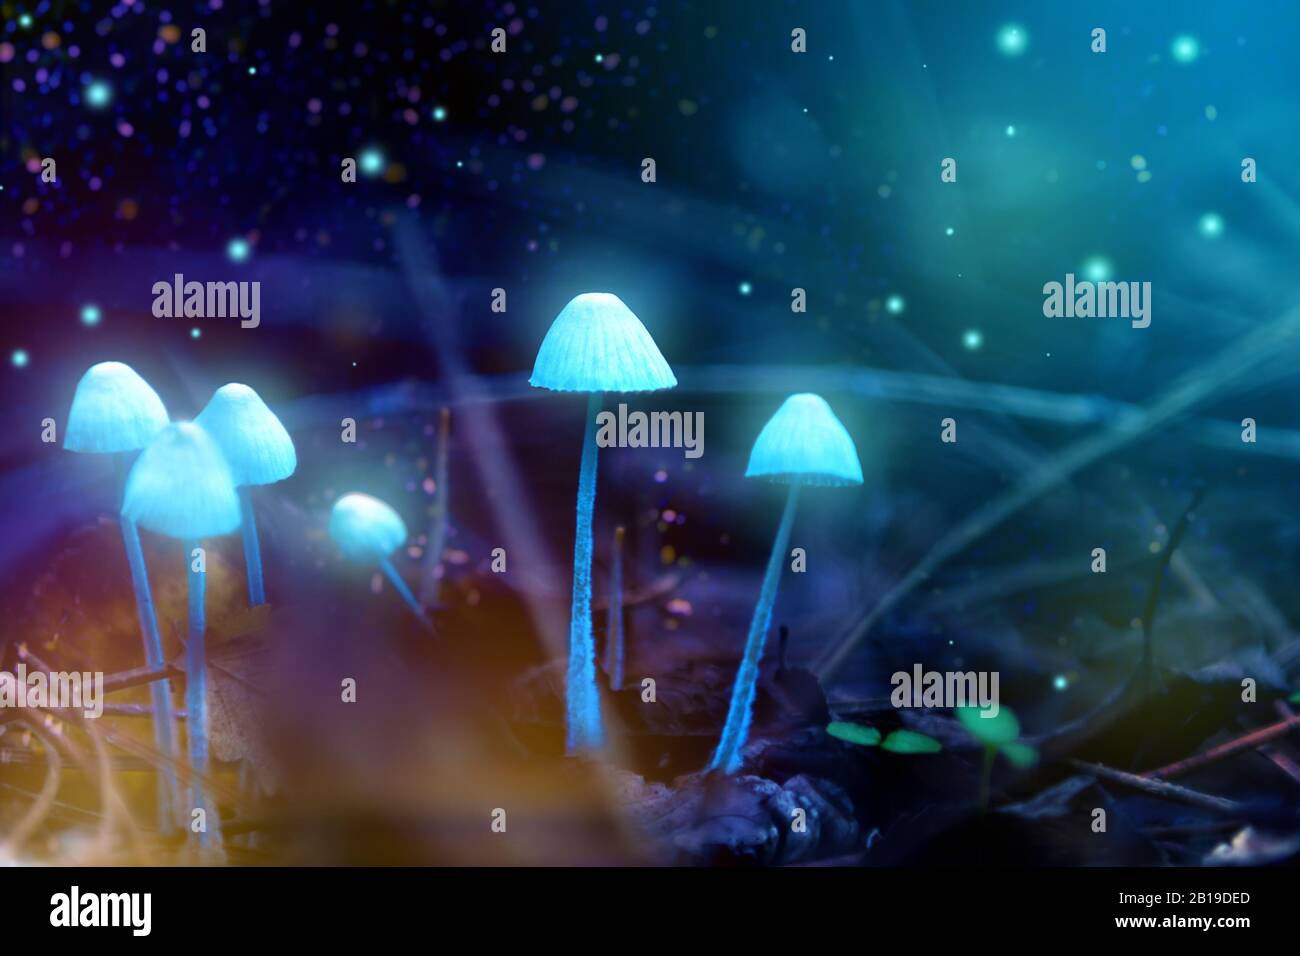 Magic glowing mushrooms in the forest, fairytale story Stock Photo